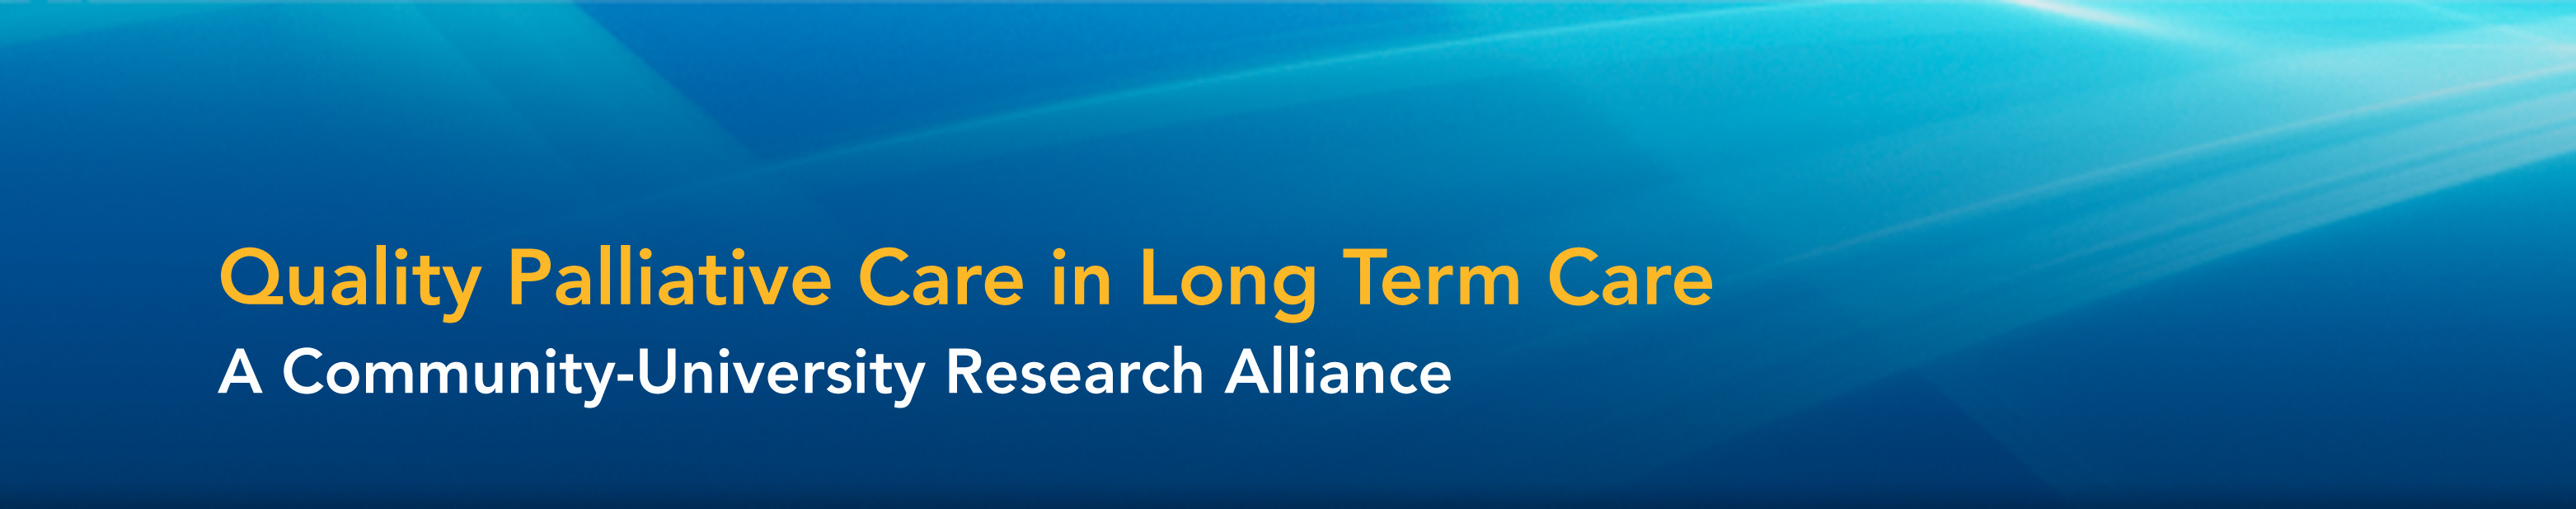 Quality Palliative Care in Long Term Care, A Community-University Research Alliance